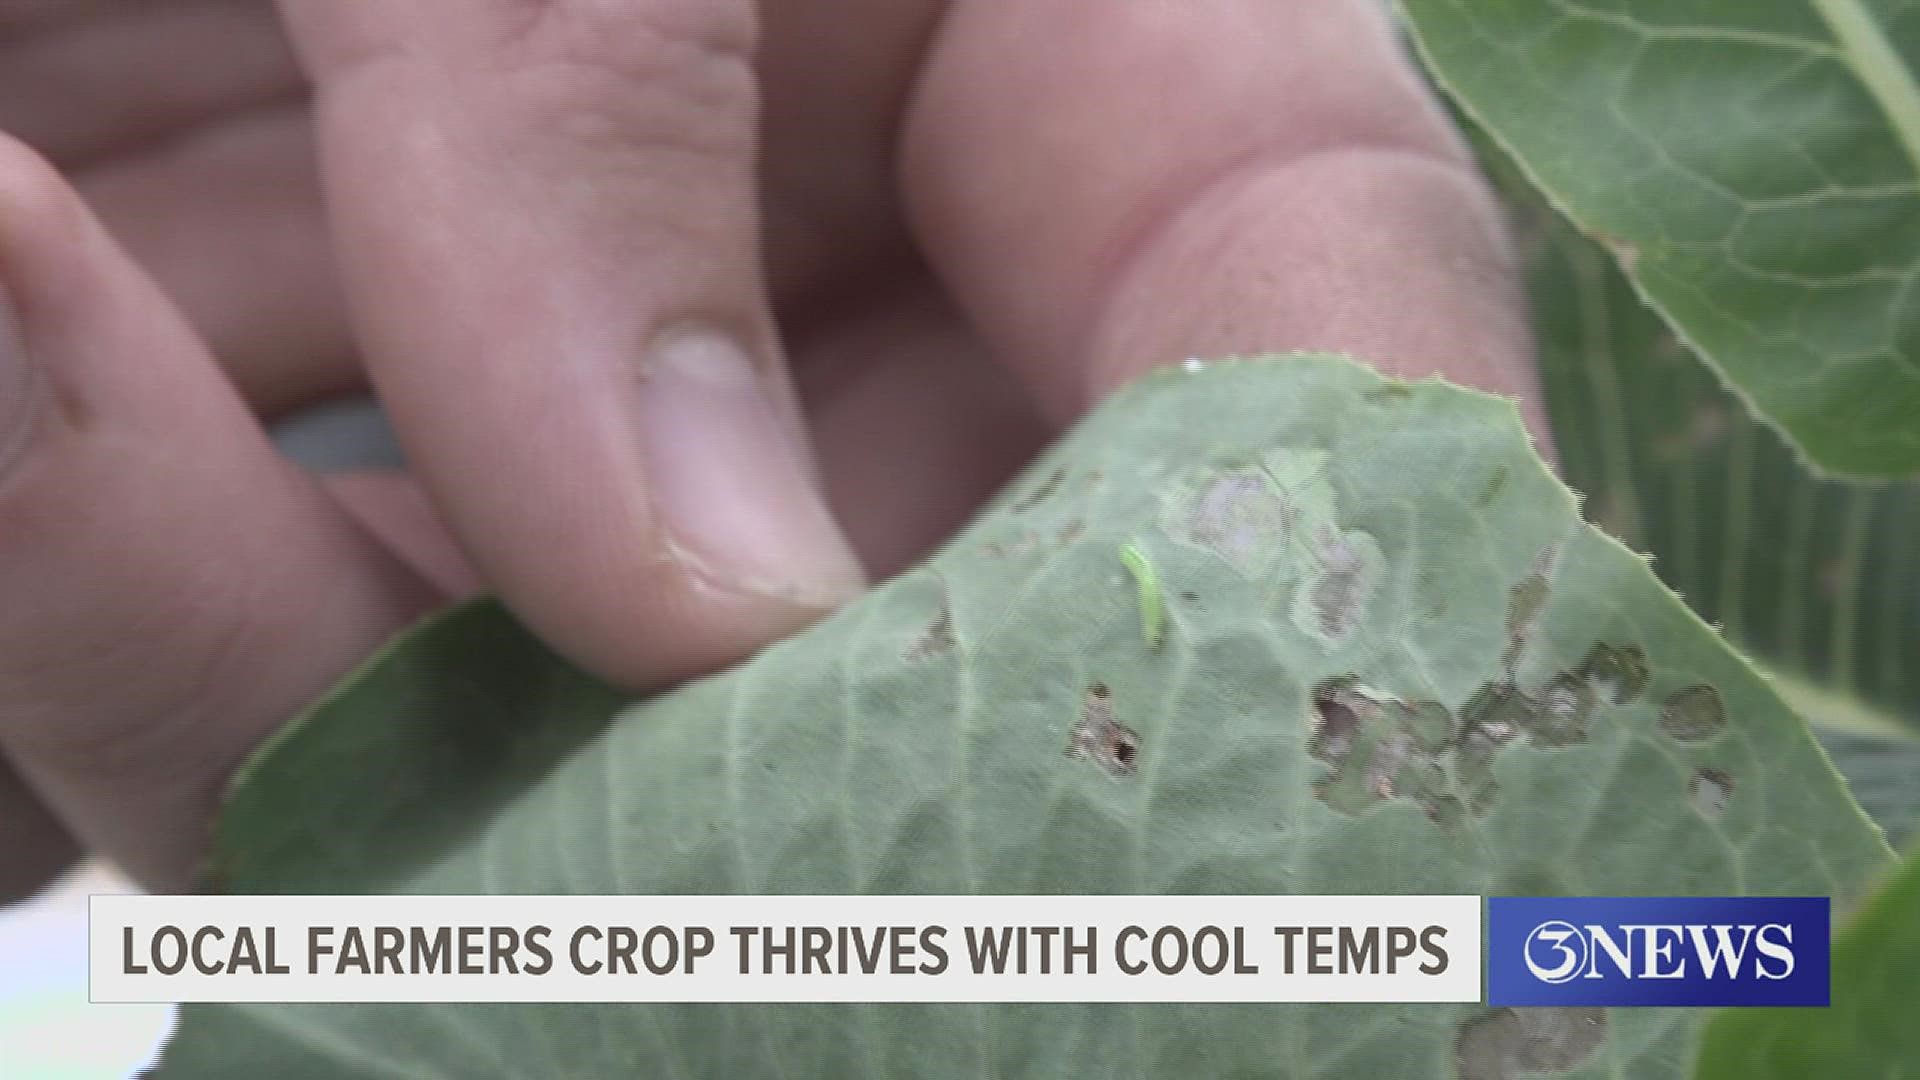 The cold keeps the bugs at a minimum, which means the farmers veggies can begin to thrive. "December through April is kind of peak on the garden." Edelen said.